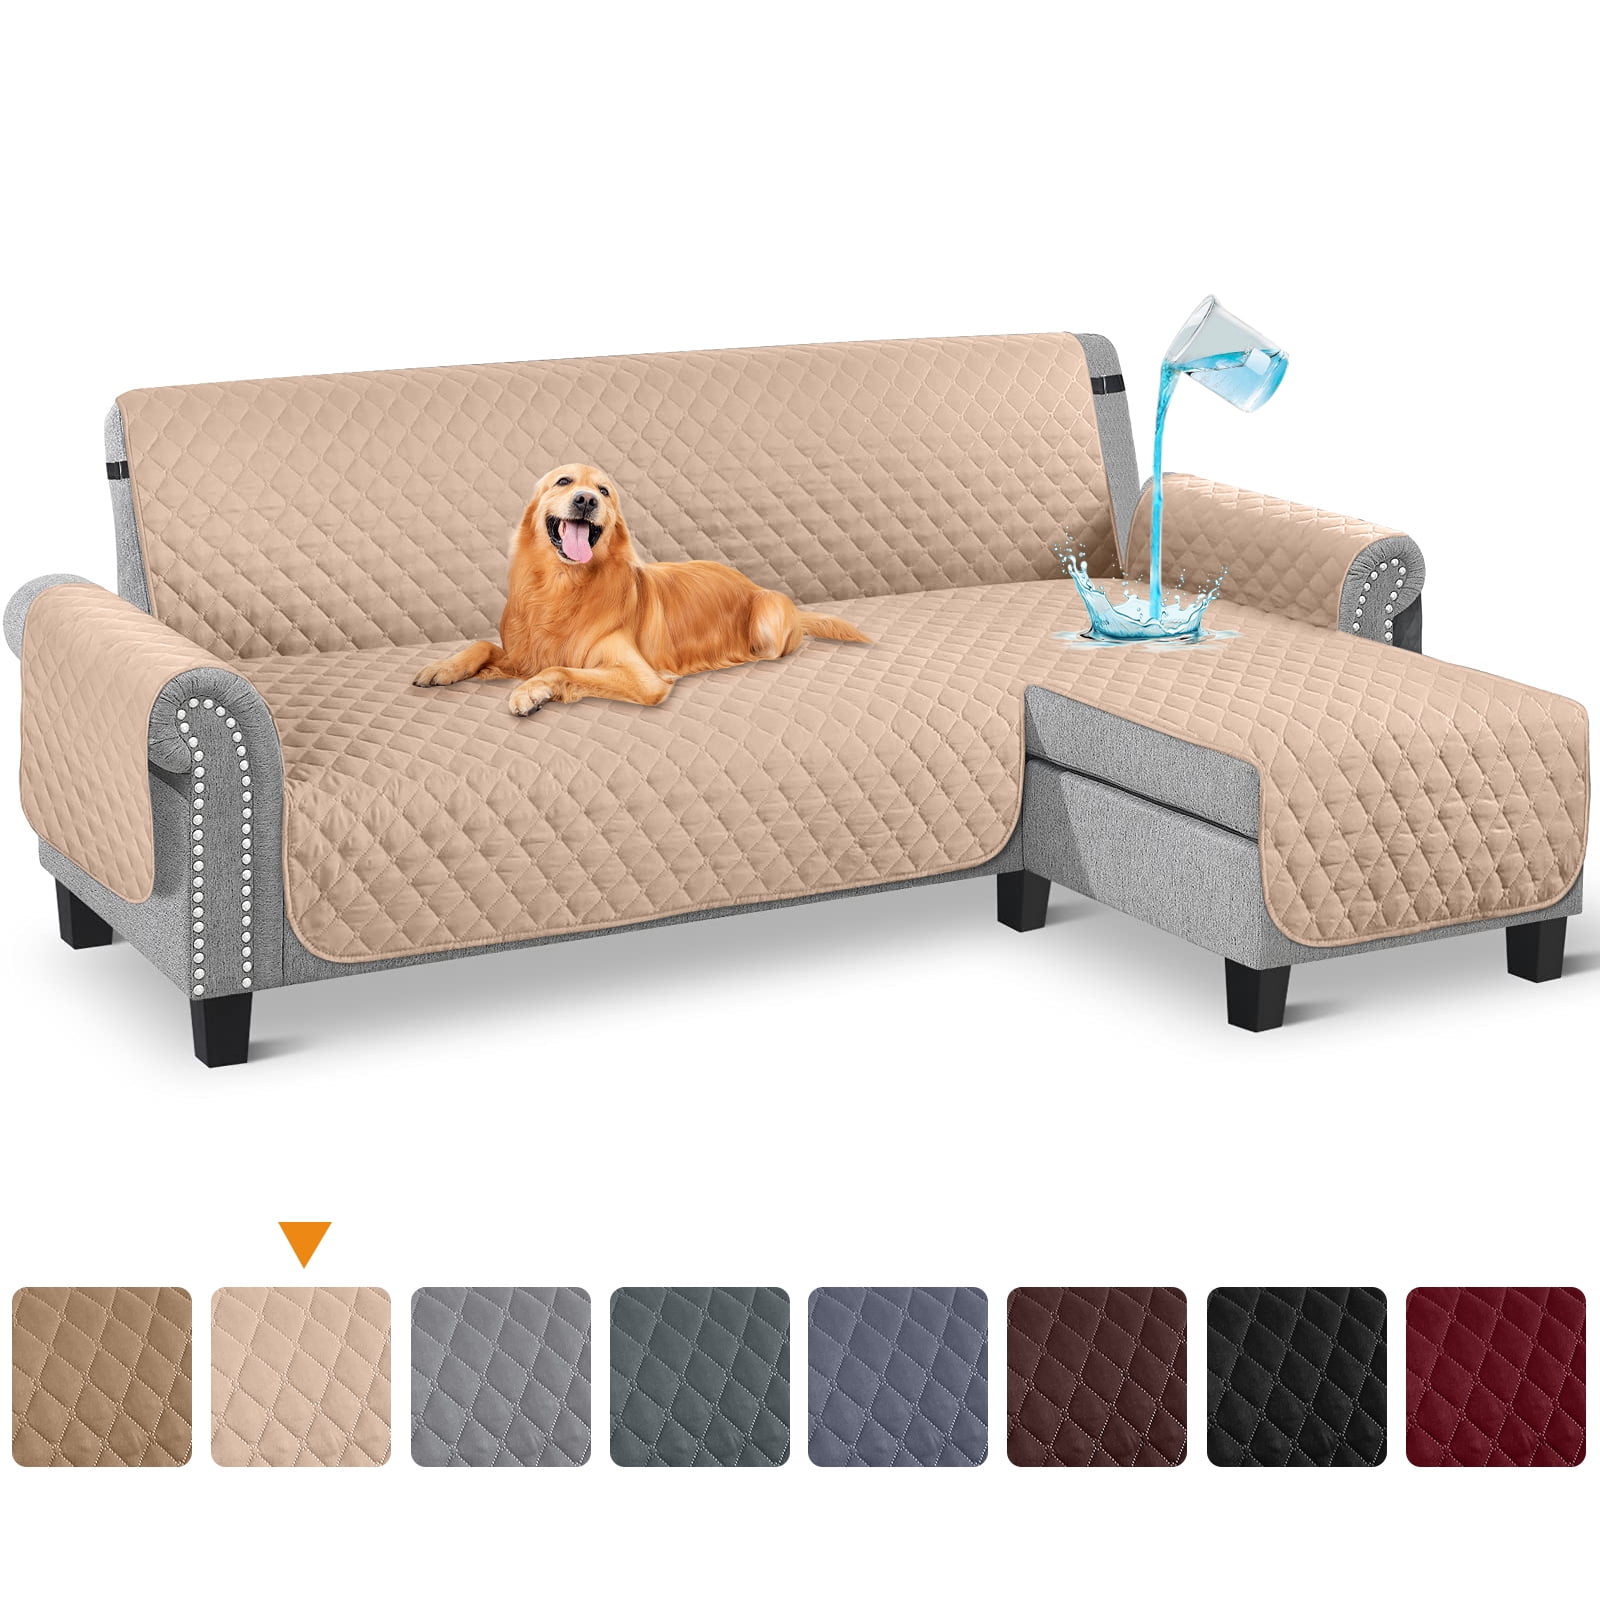 XSlive Faux Leather Waterproof Couch Sofa Cover Vintage PU Sectional Couch  Cover Non Slip Sofa Slipcover Furniture Protector for Kids Dogs Cats